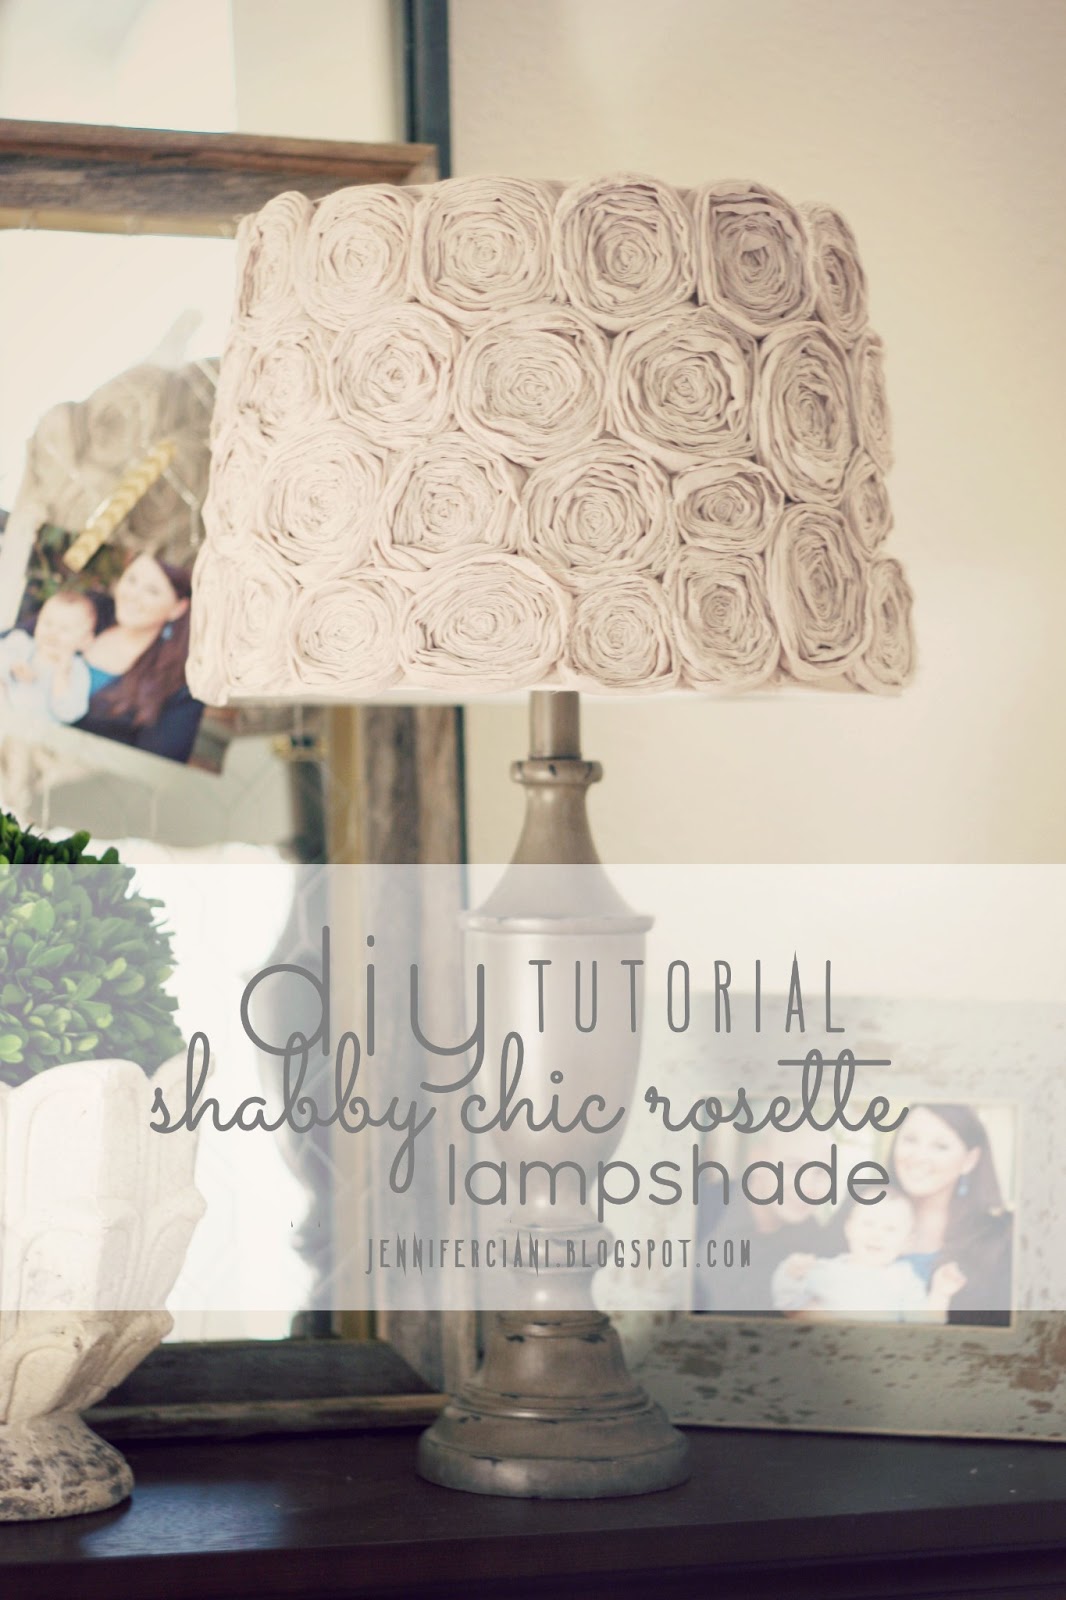 How to make a lampshade